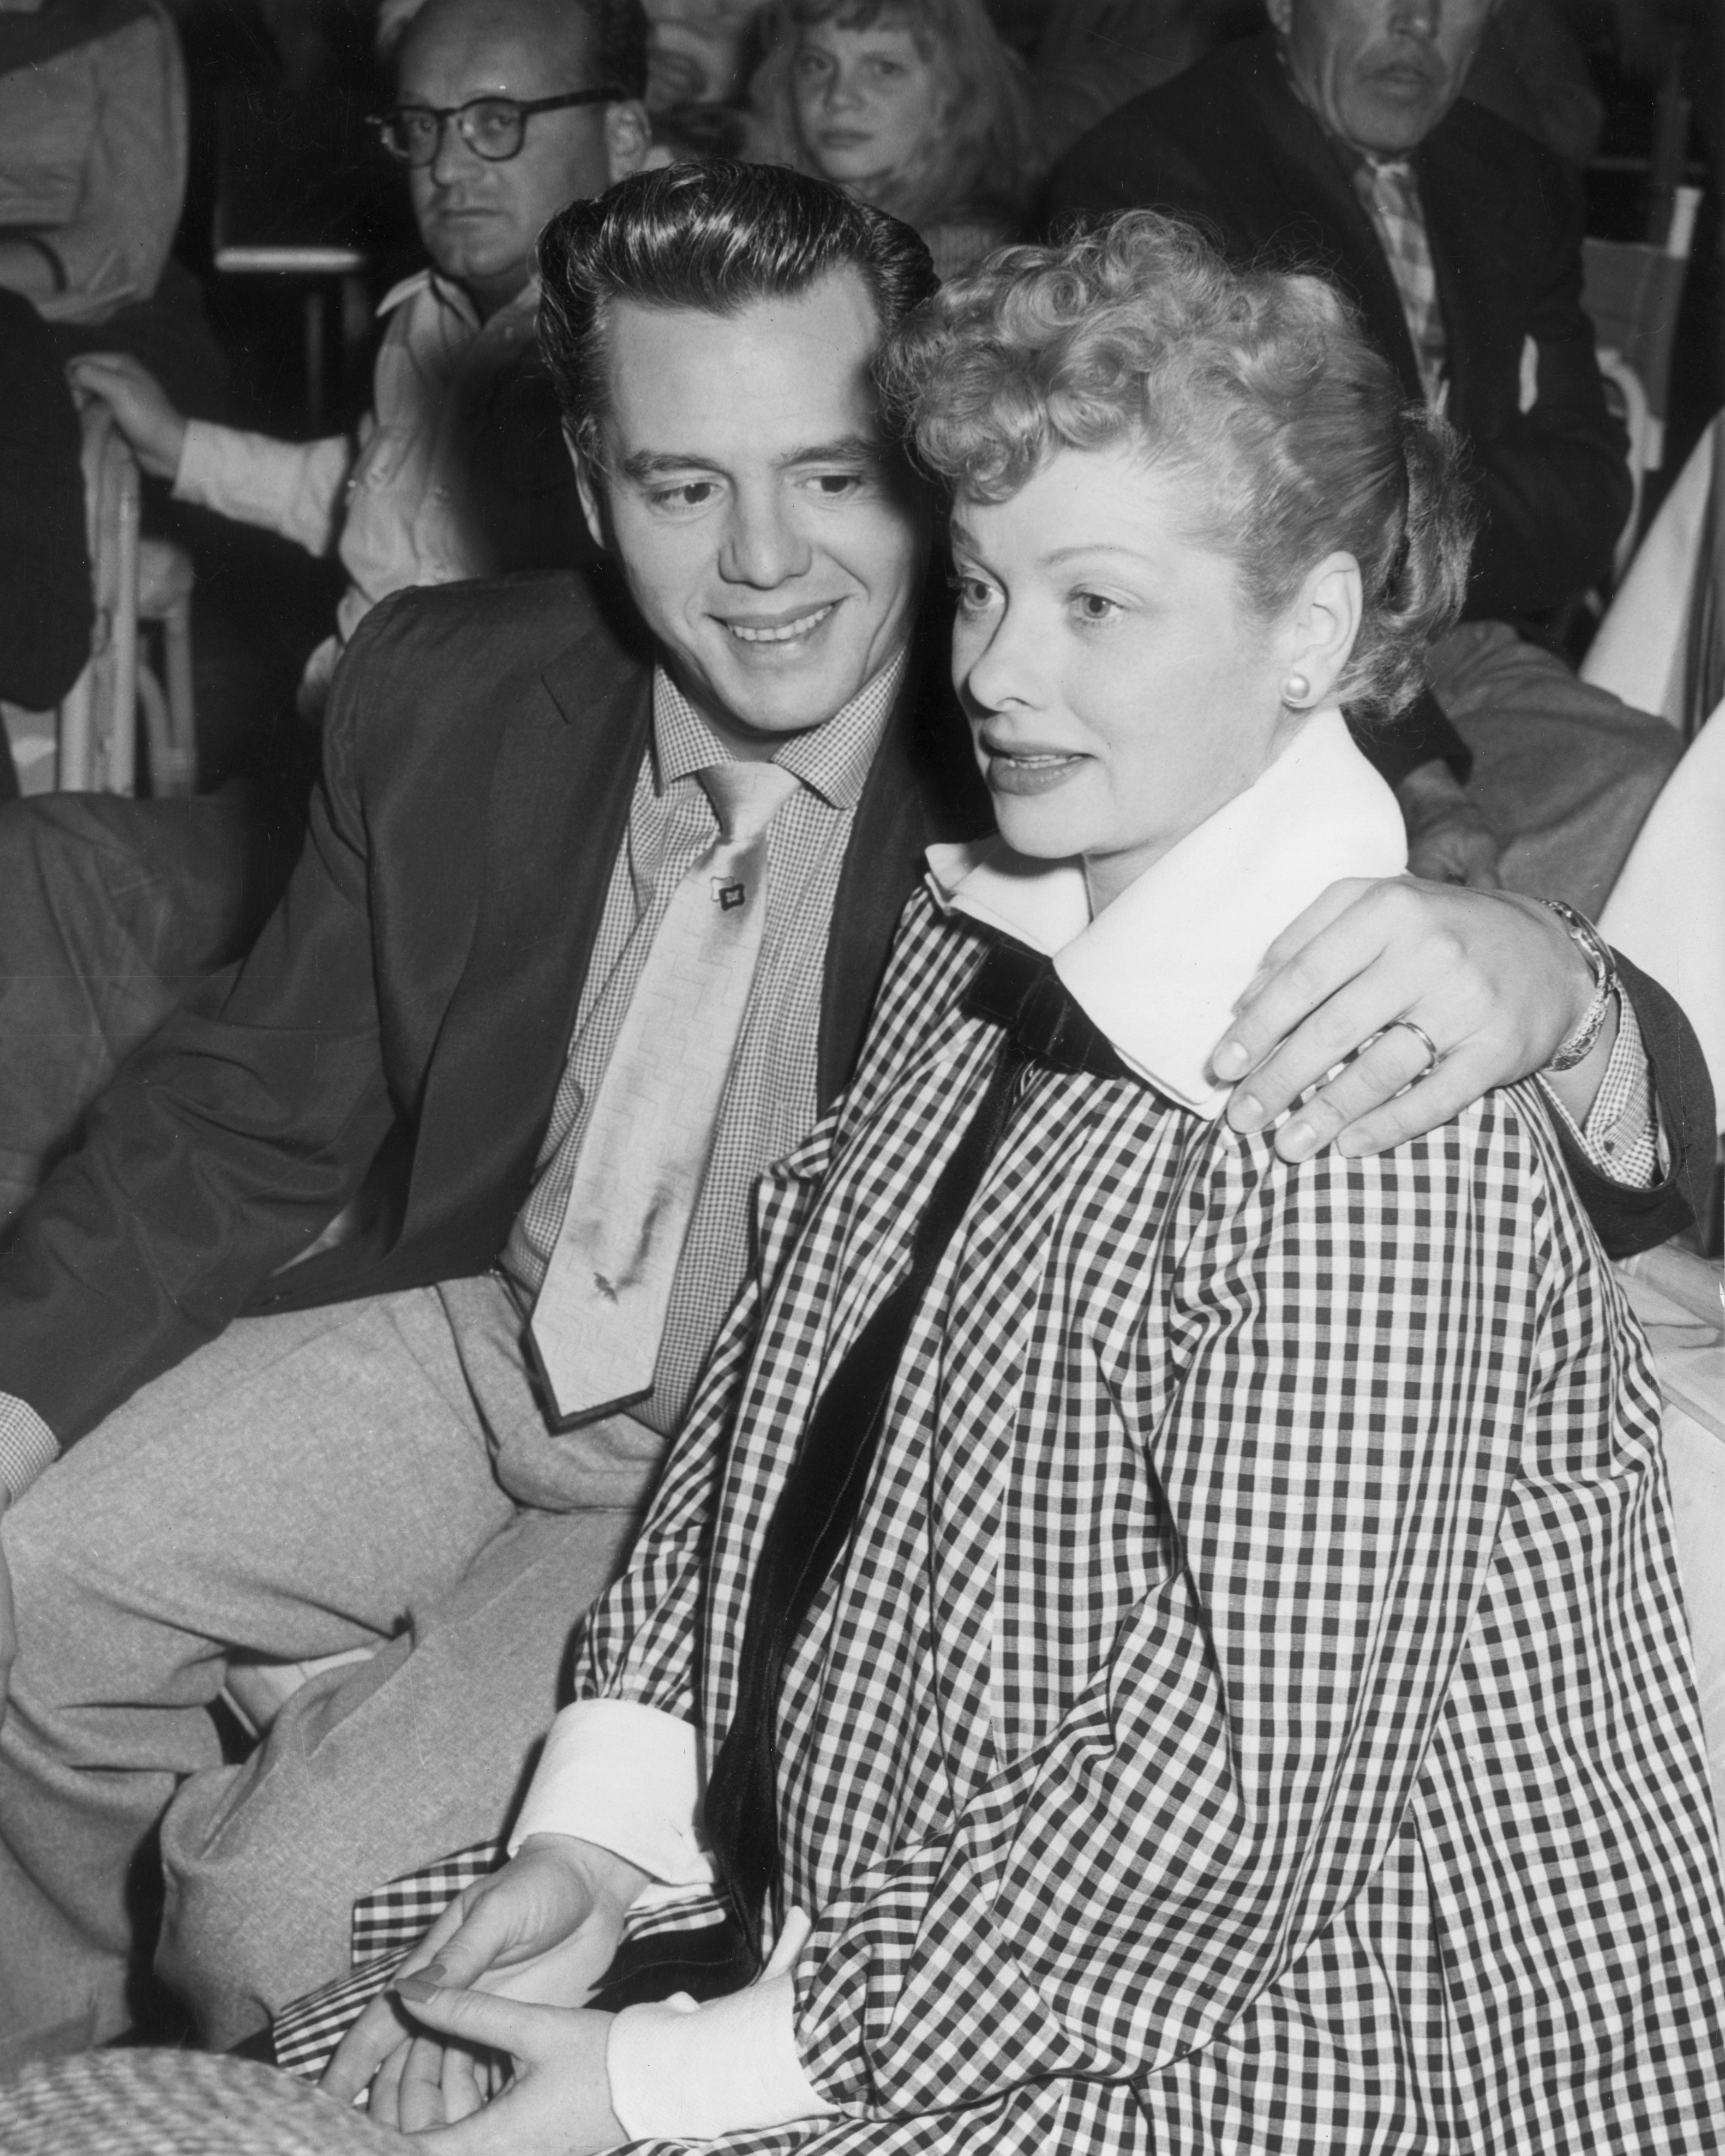 Desi Arnaz embraces his pregnant wife,Lucille Ball while watching a televised football game at the Racquet Club in Palm Springs, California in 1953. | Photo: Getty Images